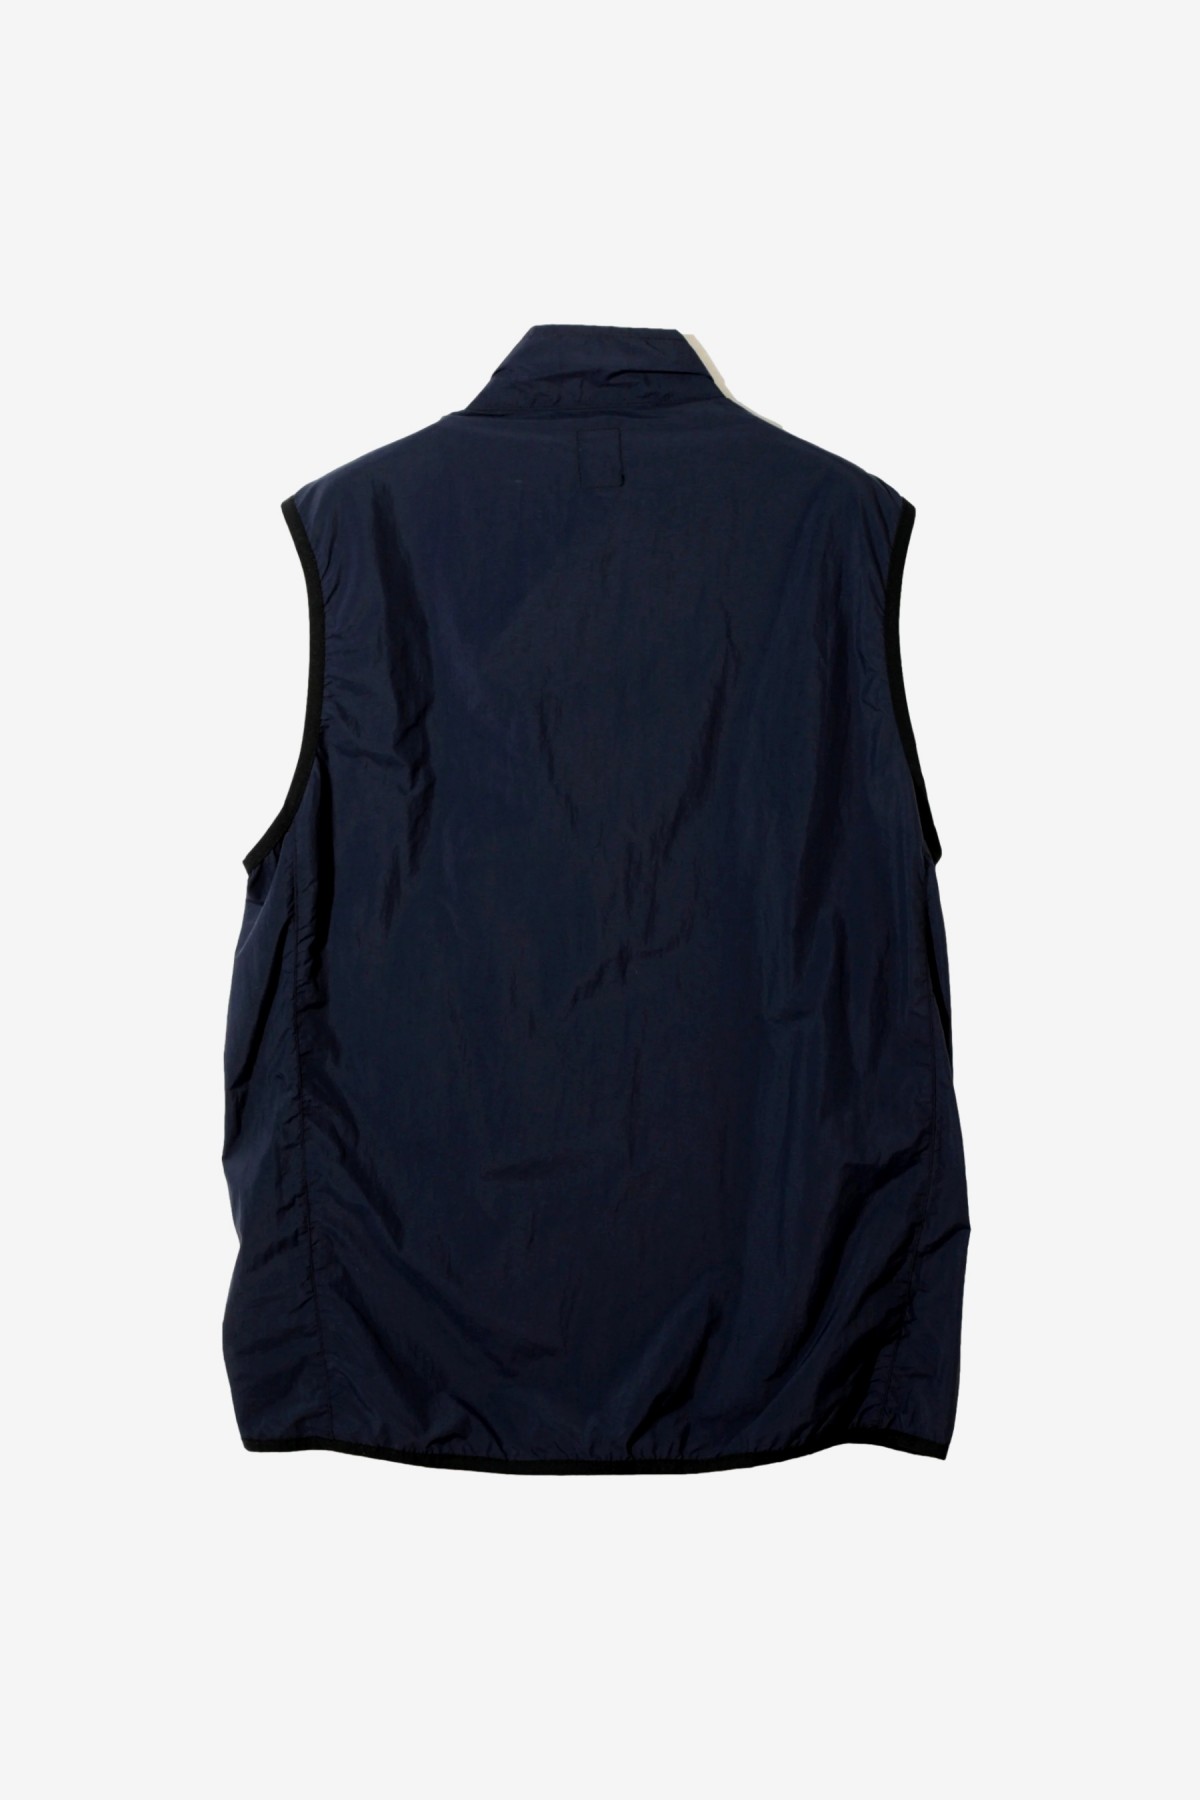 - South2 Navy Vest | West8 Packable Store in Afura